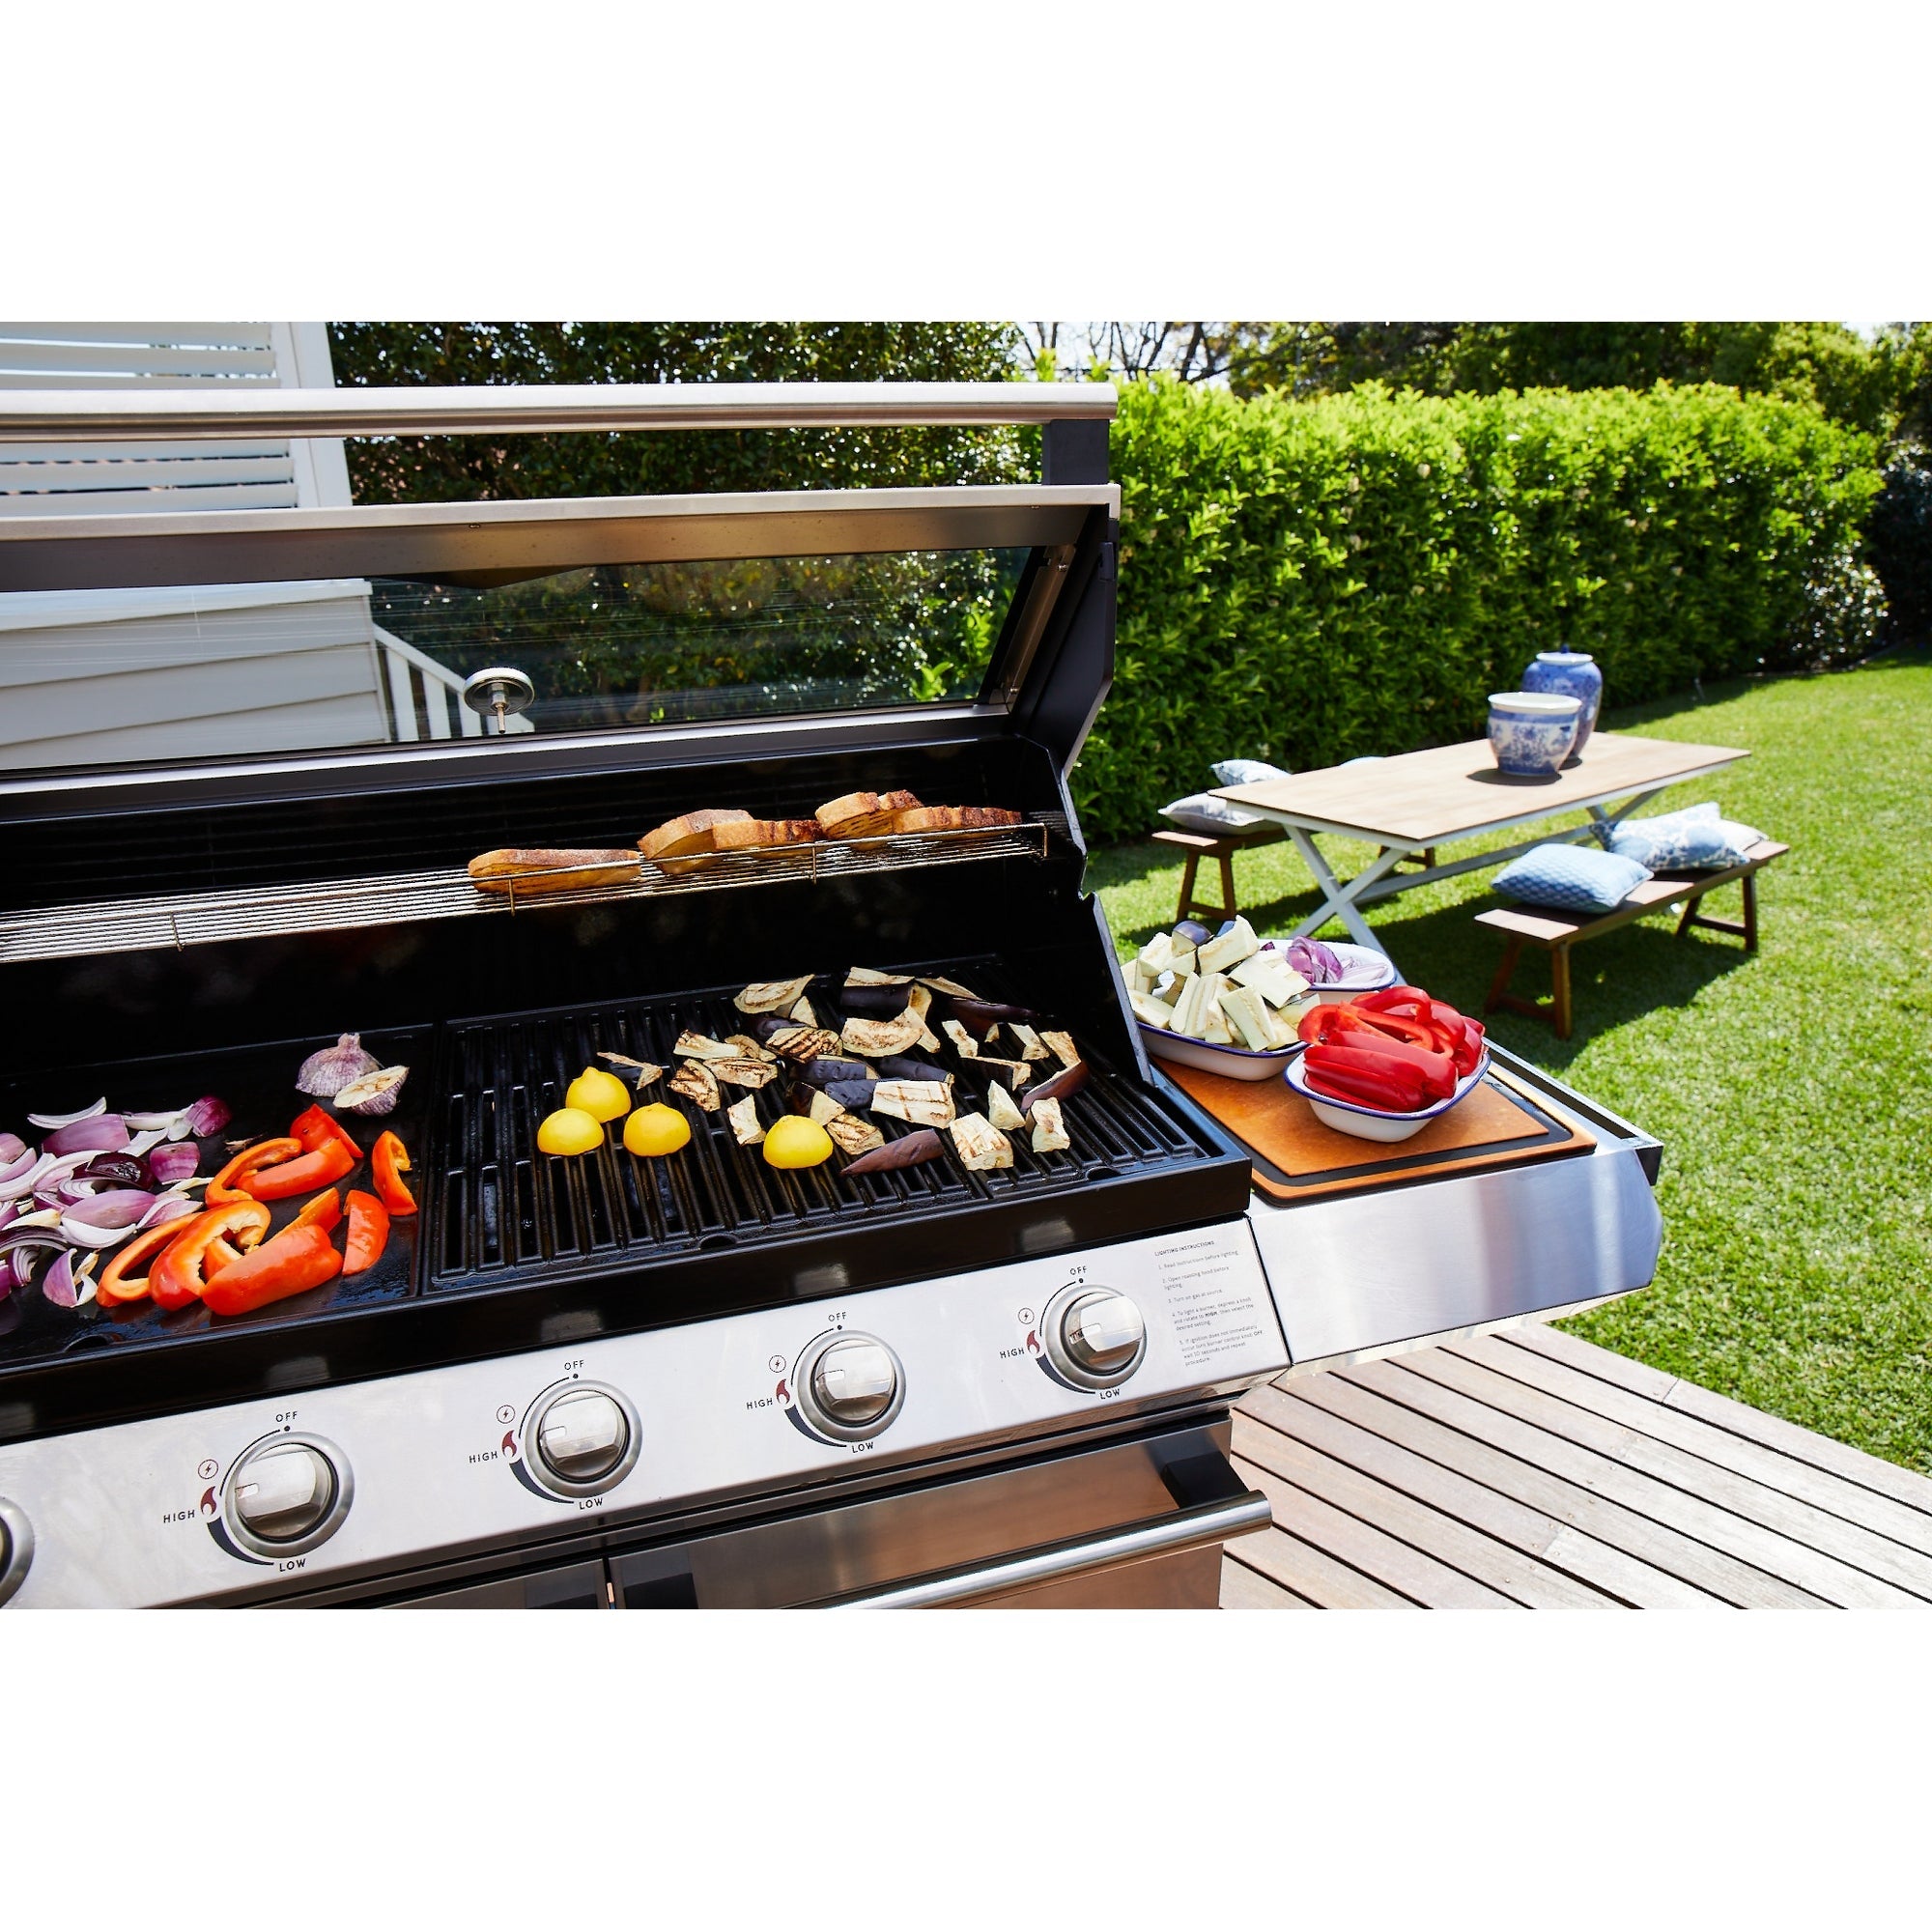 free standing gas bbq, with food on the grill 